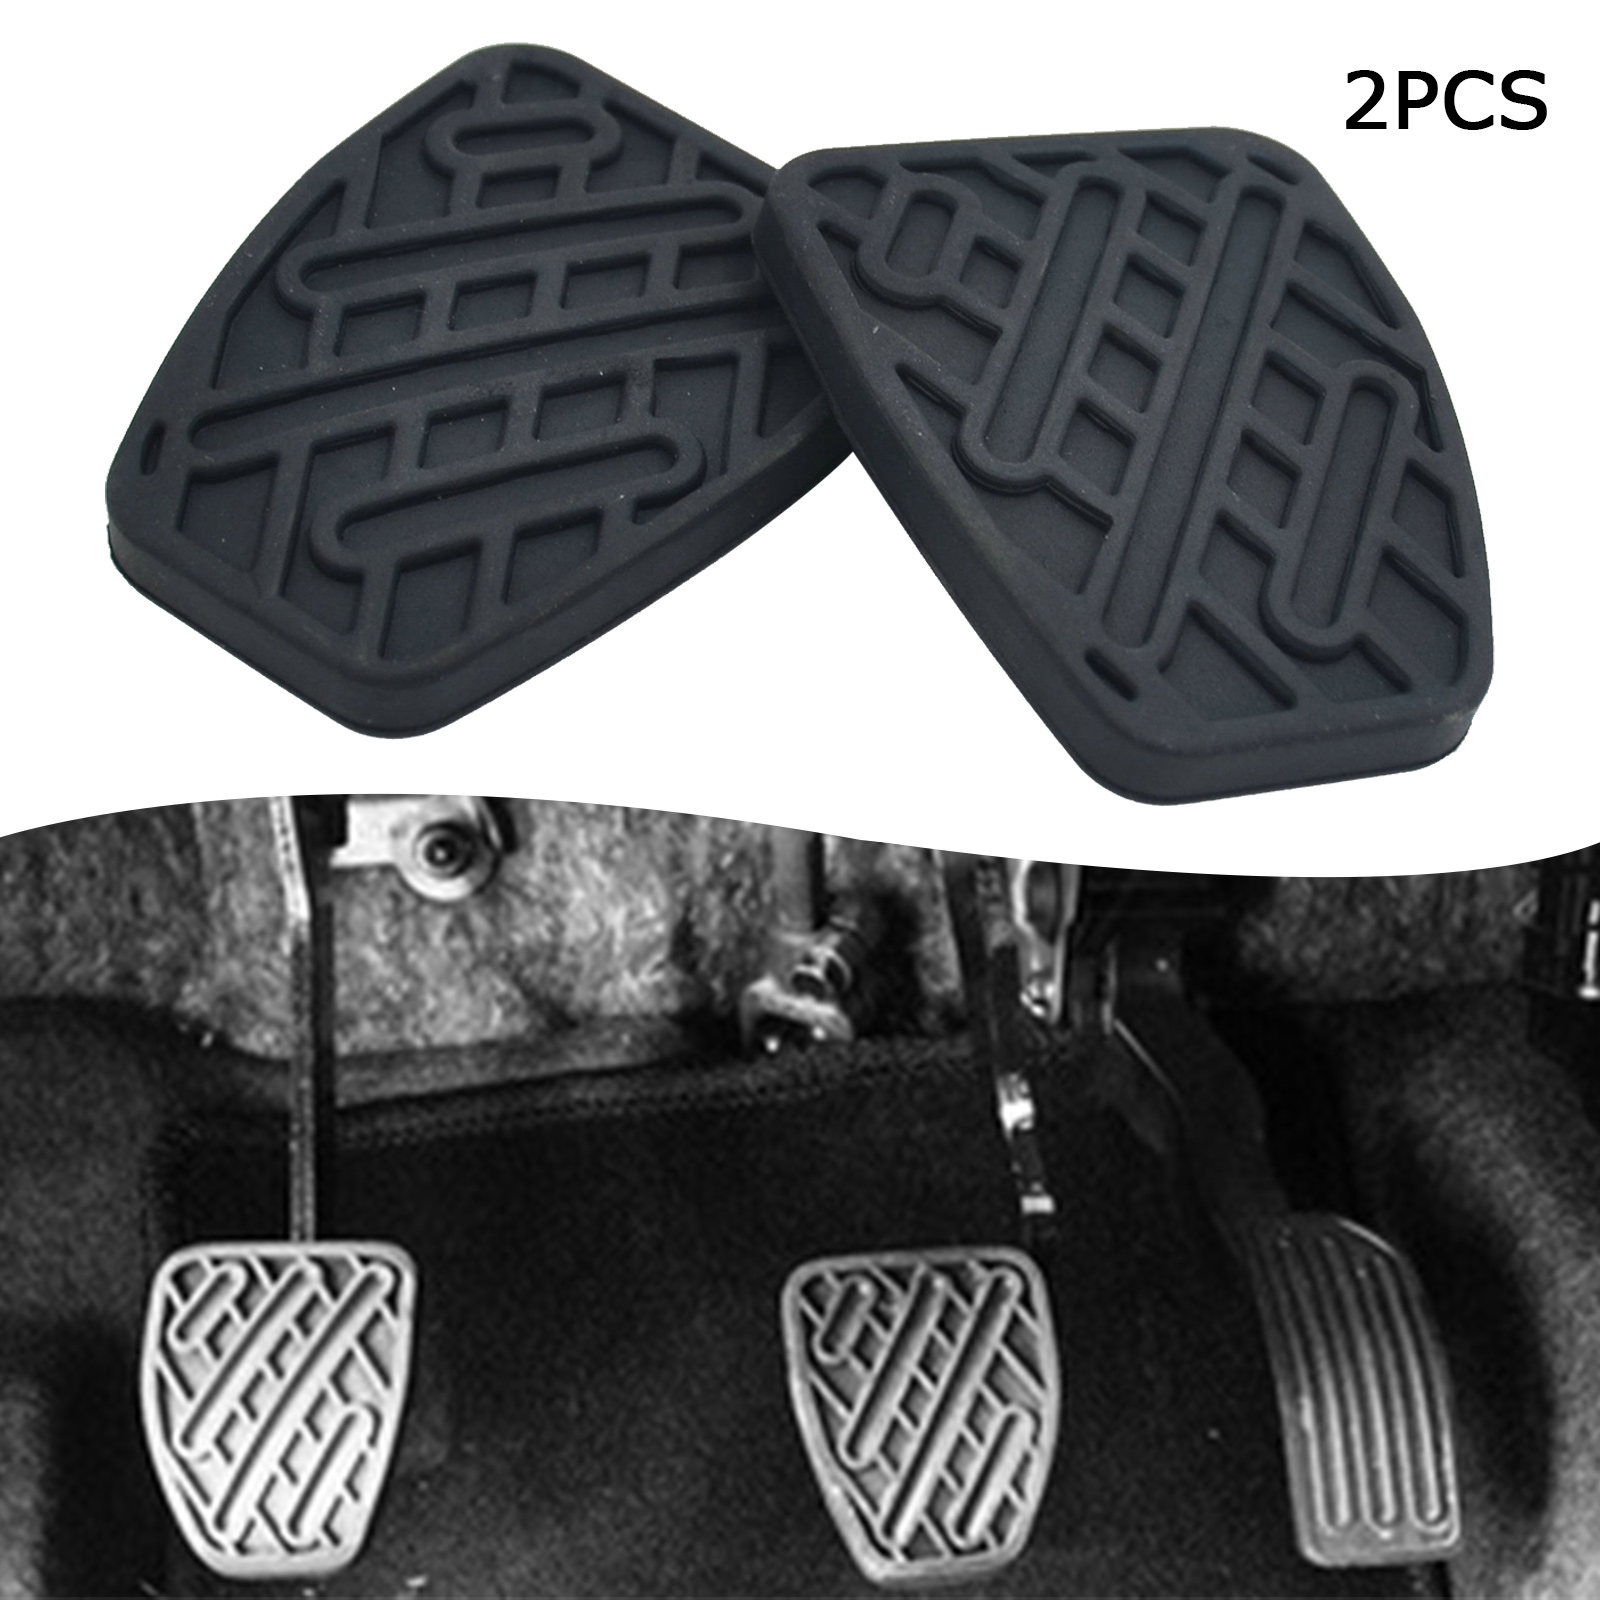 Aramox Brake Clutch Pedal Pad,1 Pair of Auto Brake Clutch Pedal Pad Rubber Cover for Qashqai 2007-2016 46531JD00A 